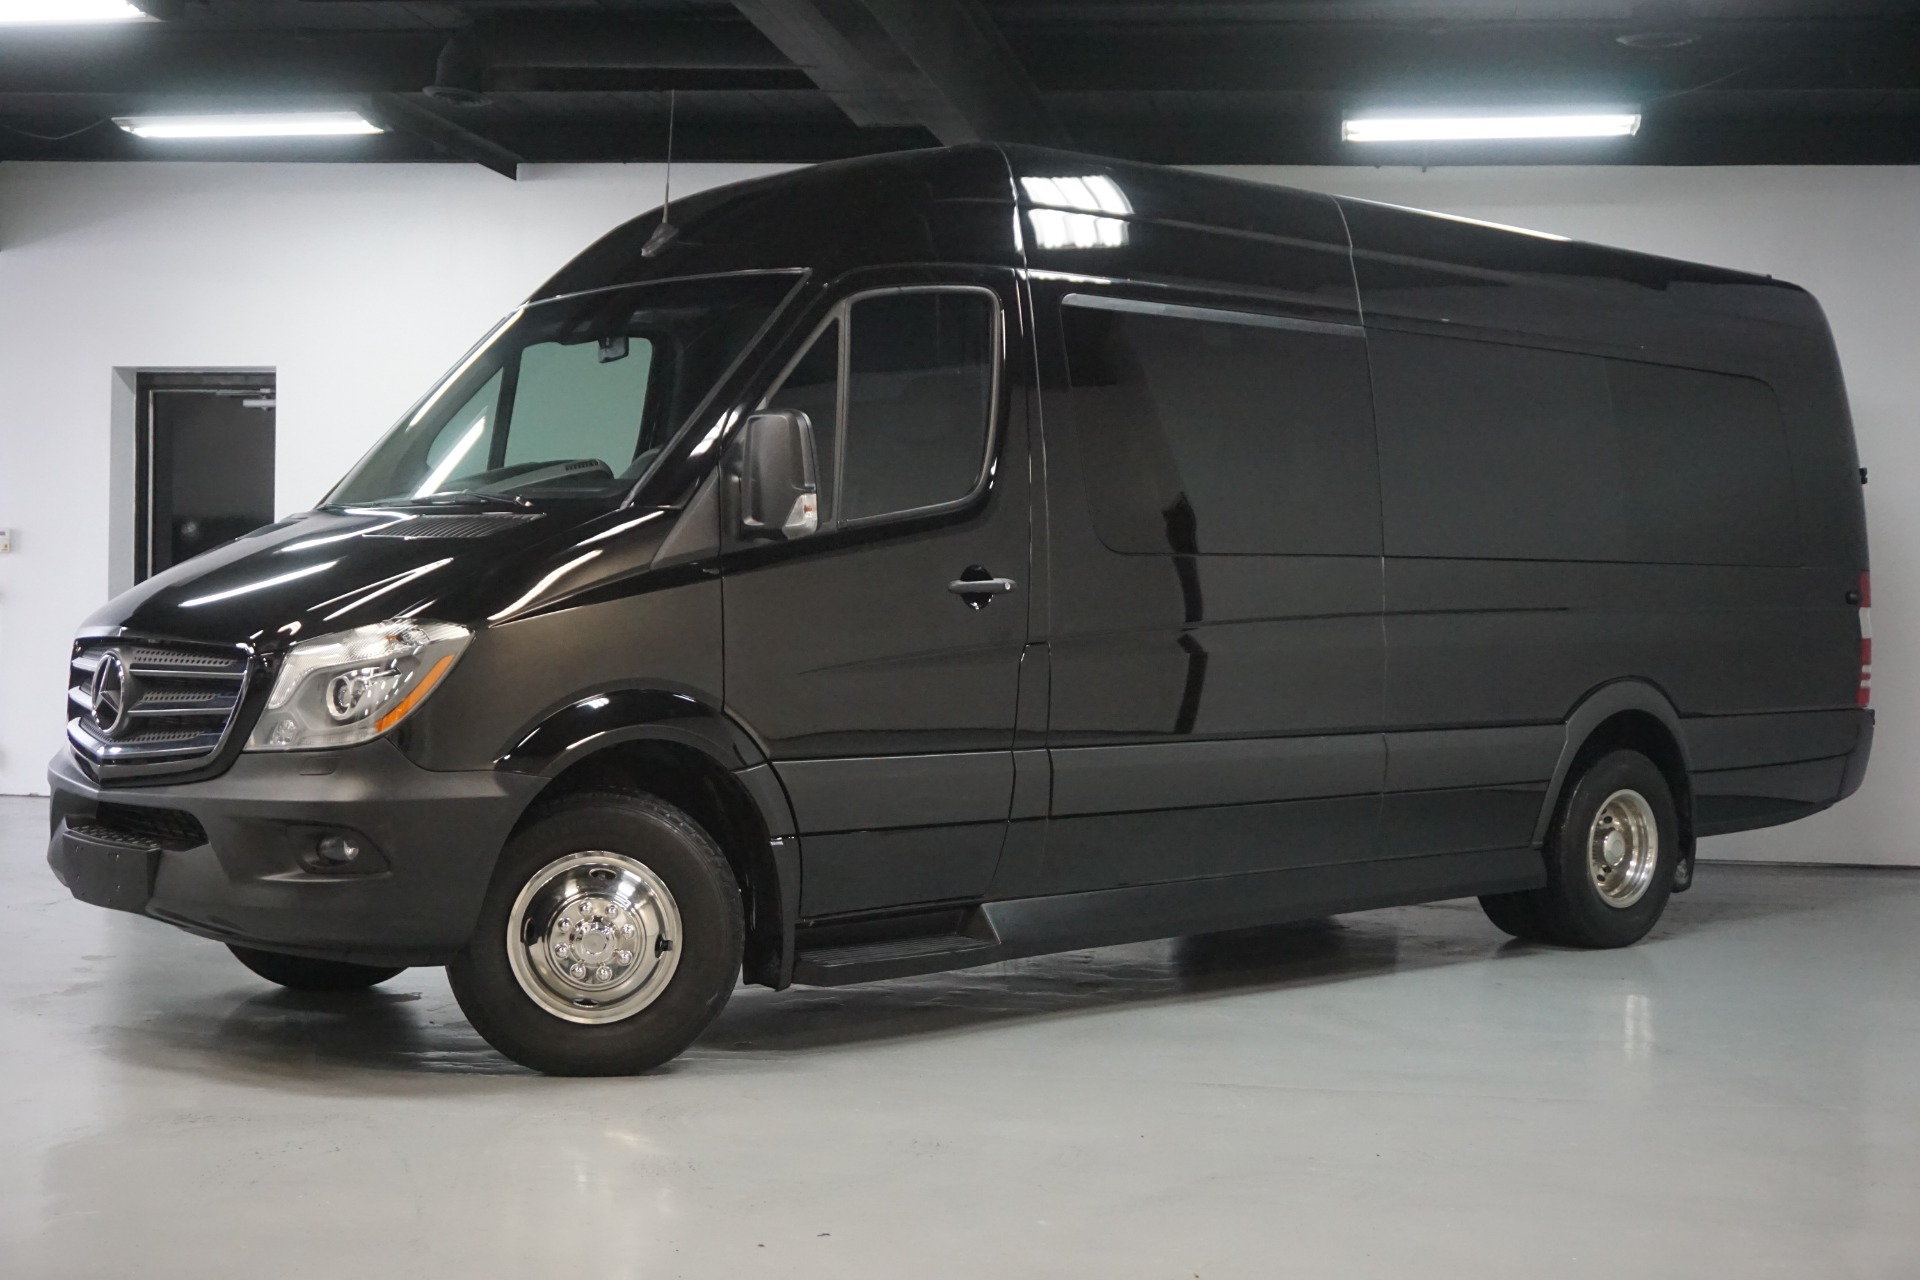 Used 2017 Obsidian Black Metallic Mercedes-Benz Sprinter LCW Automotive  Limousine 3500 XD Sprinter FULL LIMO CONVERSION PACKAGE For Sale (Sold) |  Prime Motorz Stock #2617